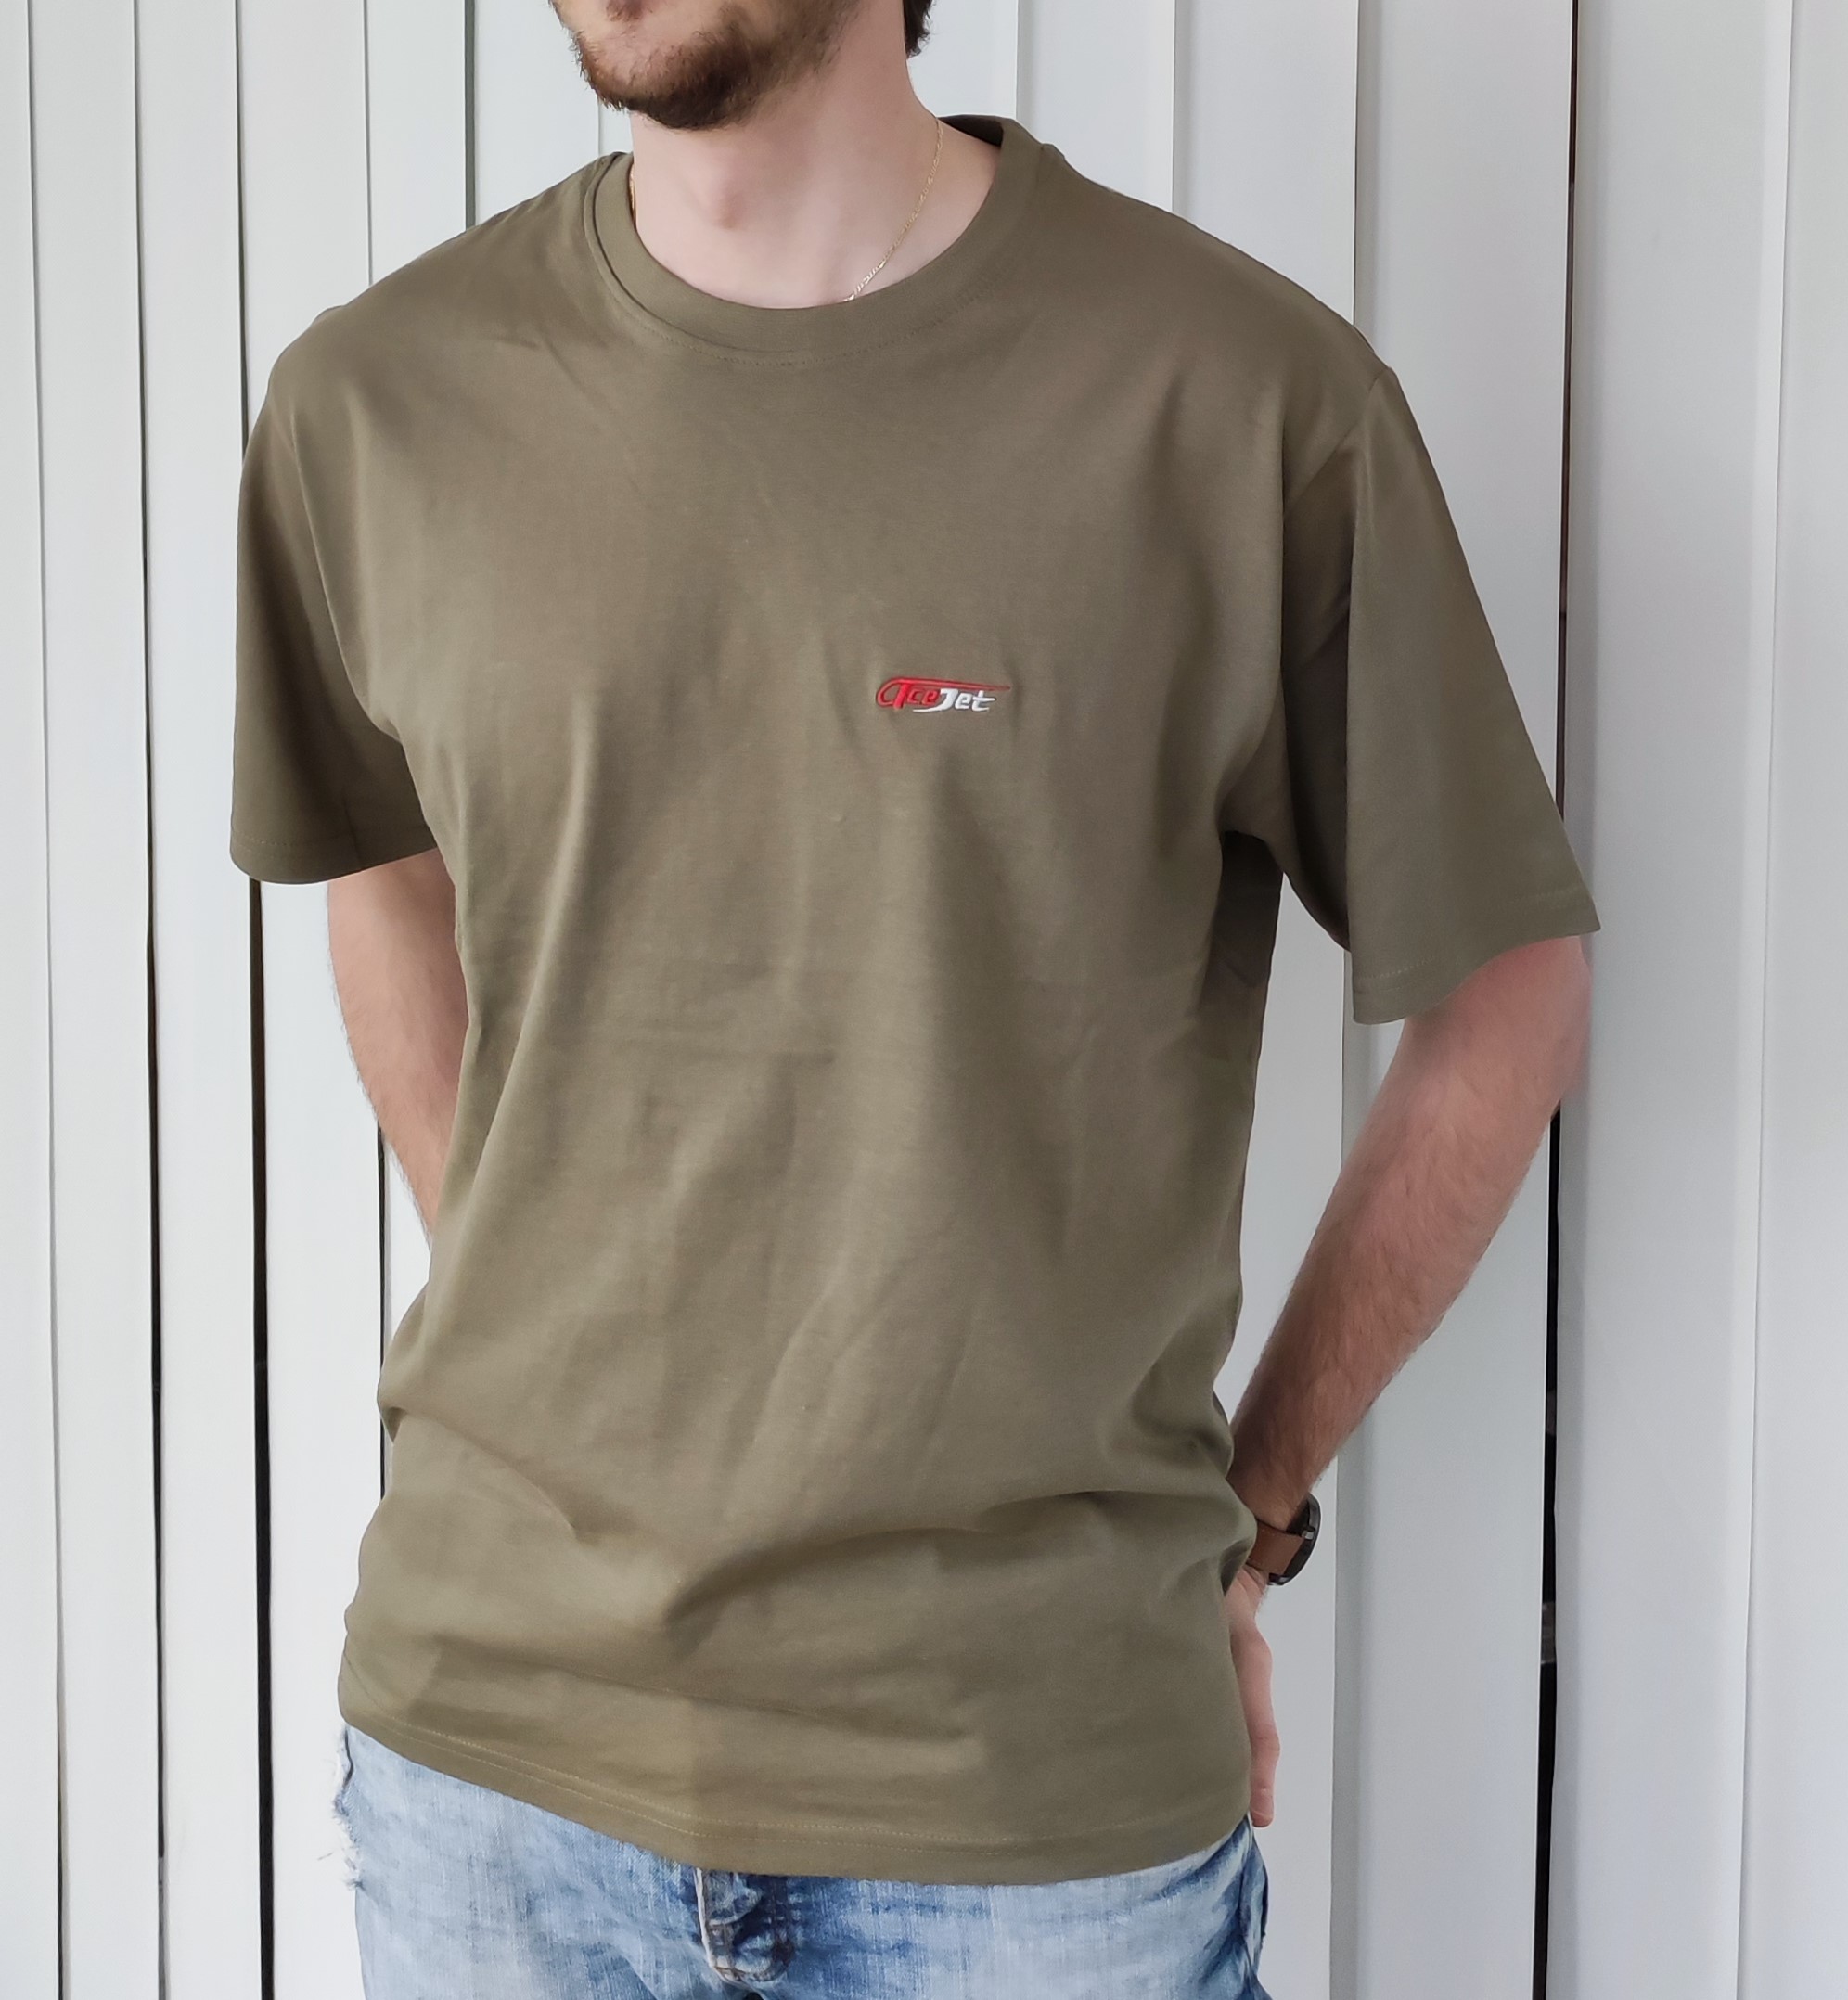 ACEJET T-SHIRT - army S